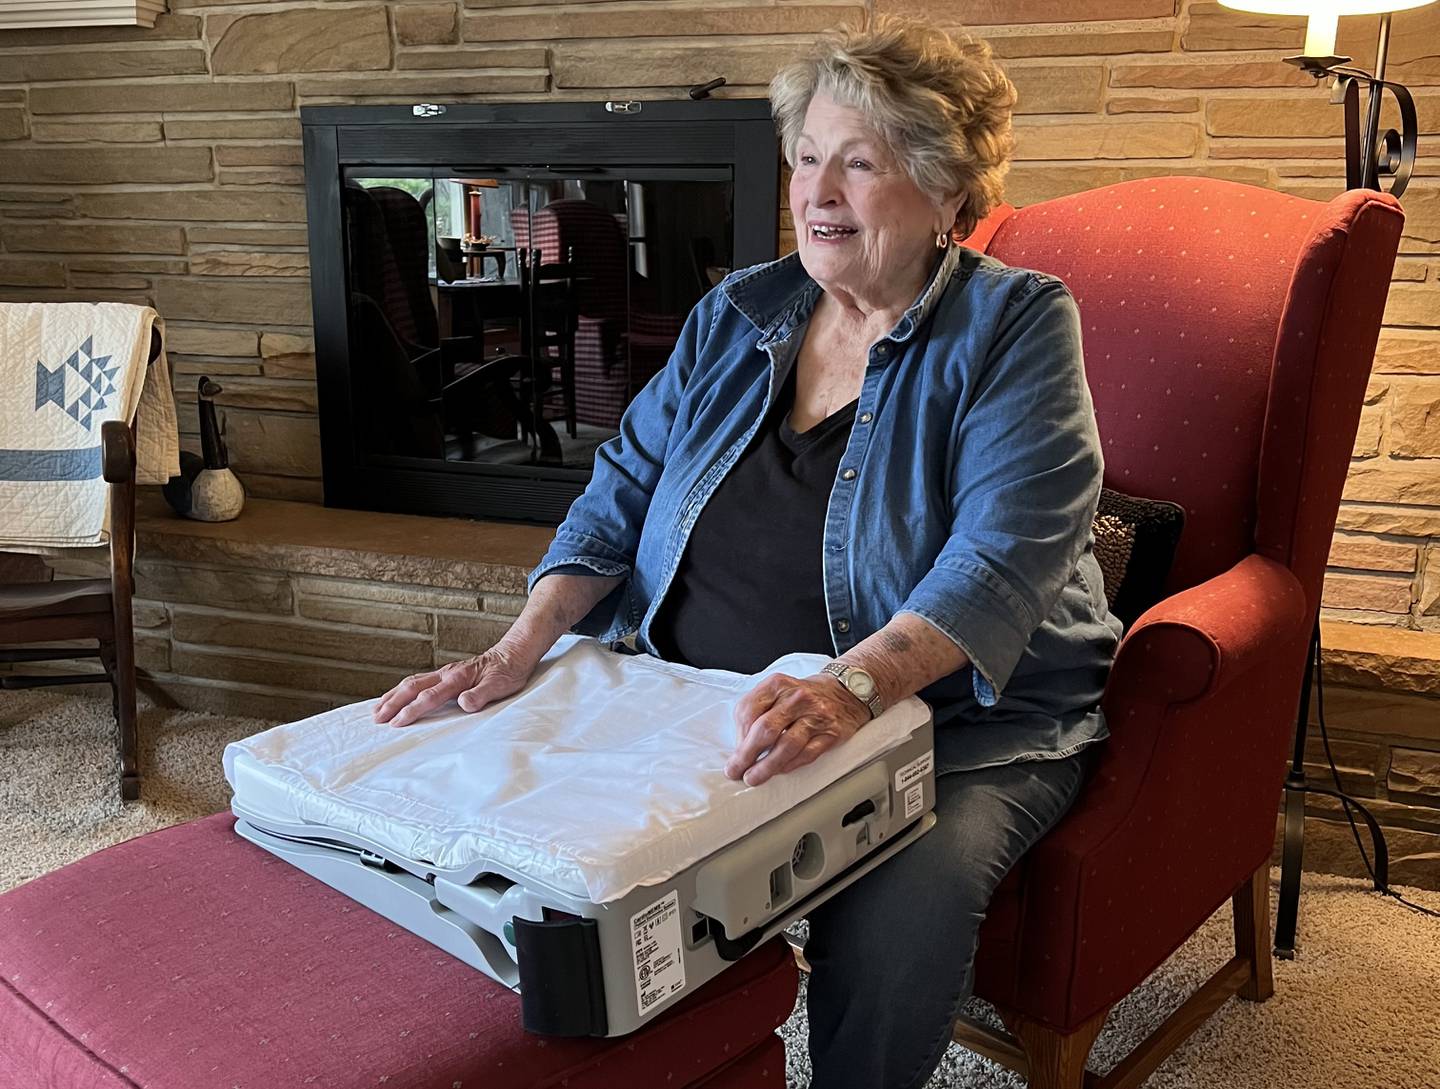 On March 3, 2023, Diana Morrasy-Carls smiles while talking about the peace of mind she's found since she was implanted with a CardioMEMs device at Northwestern Medicine Kishwaukee Hospital.